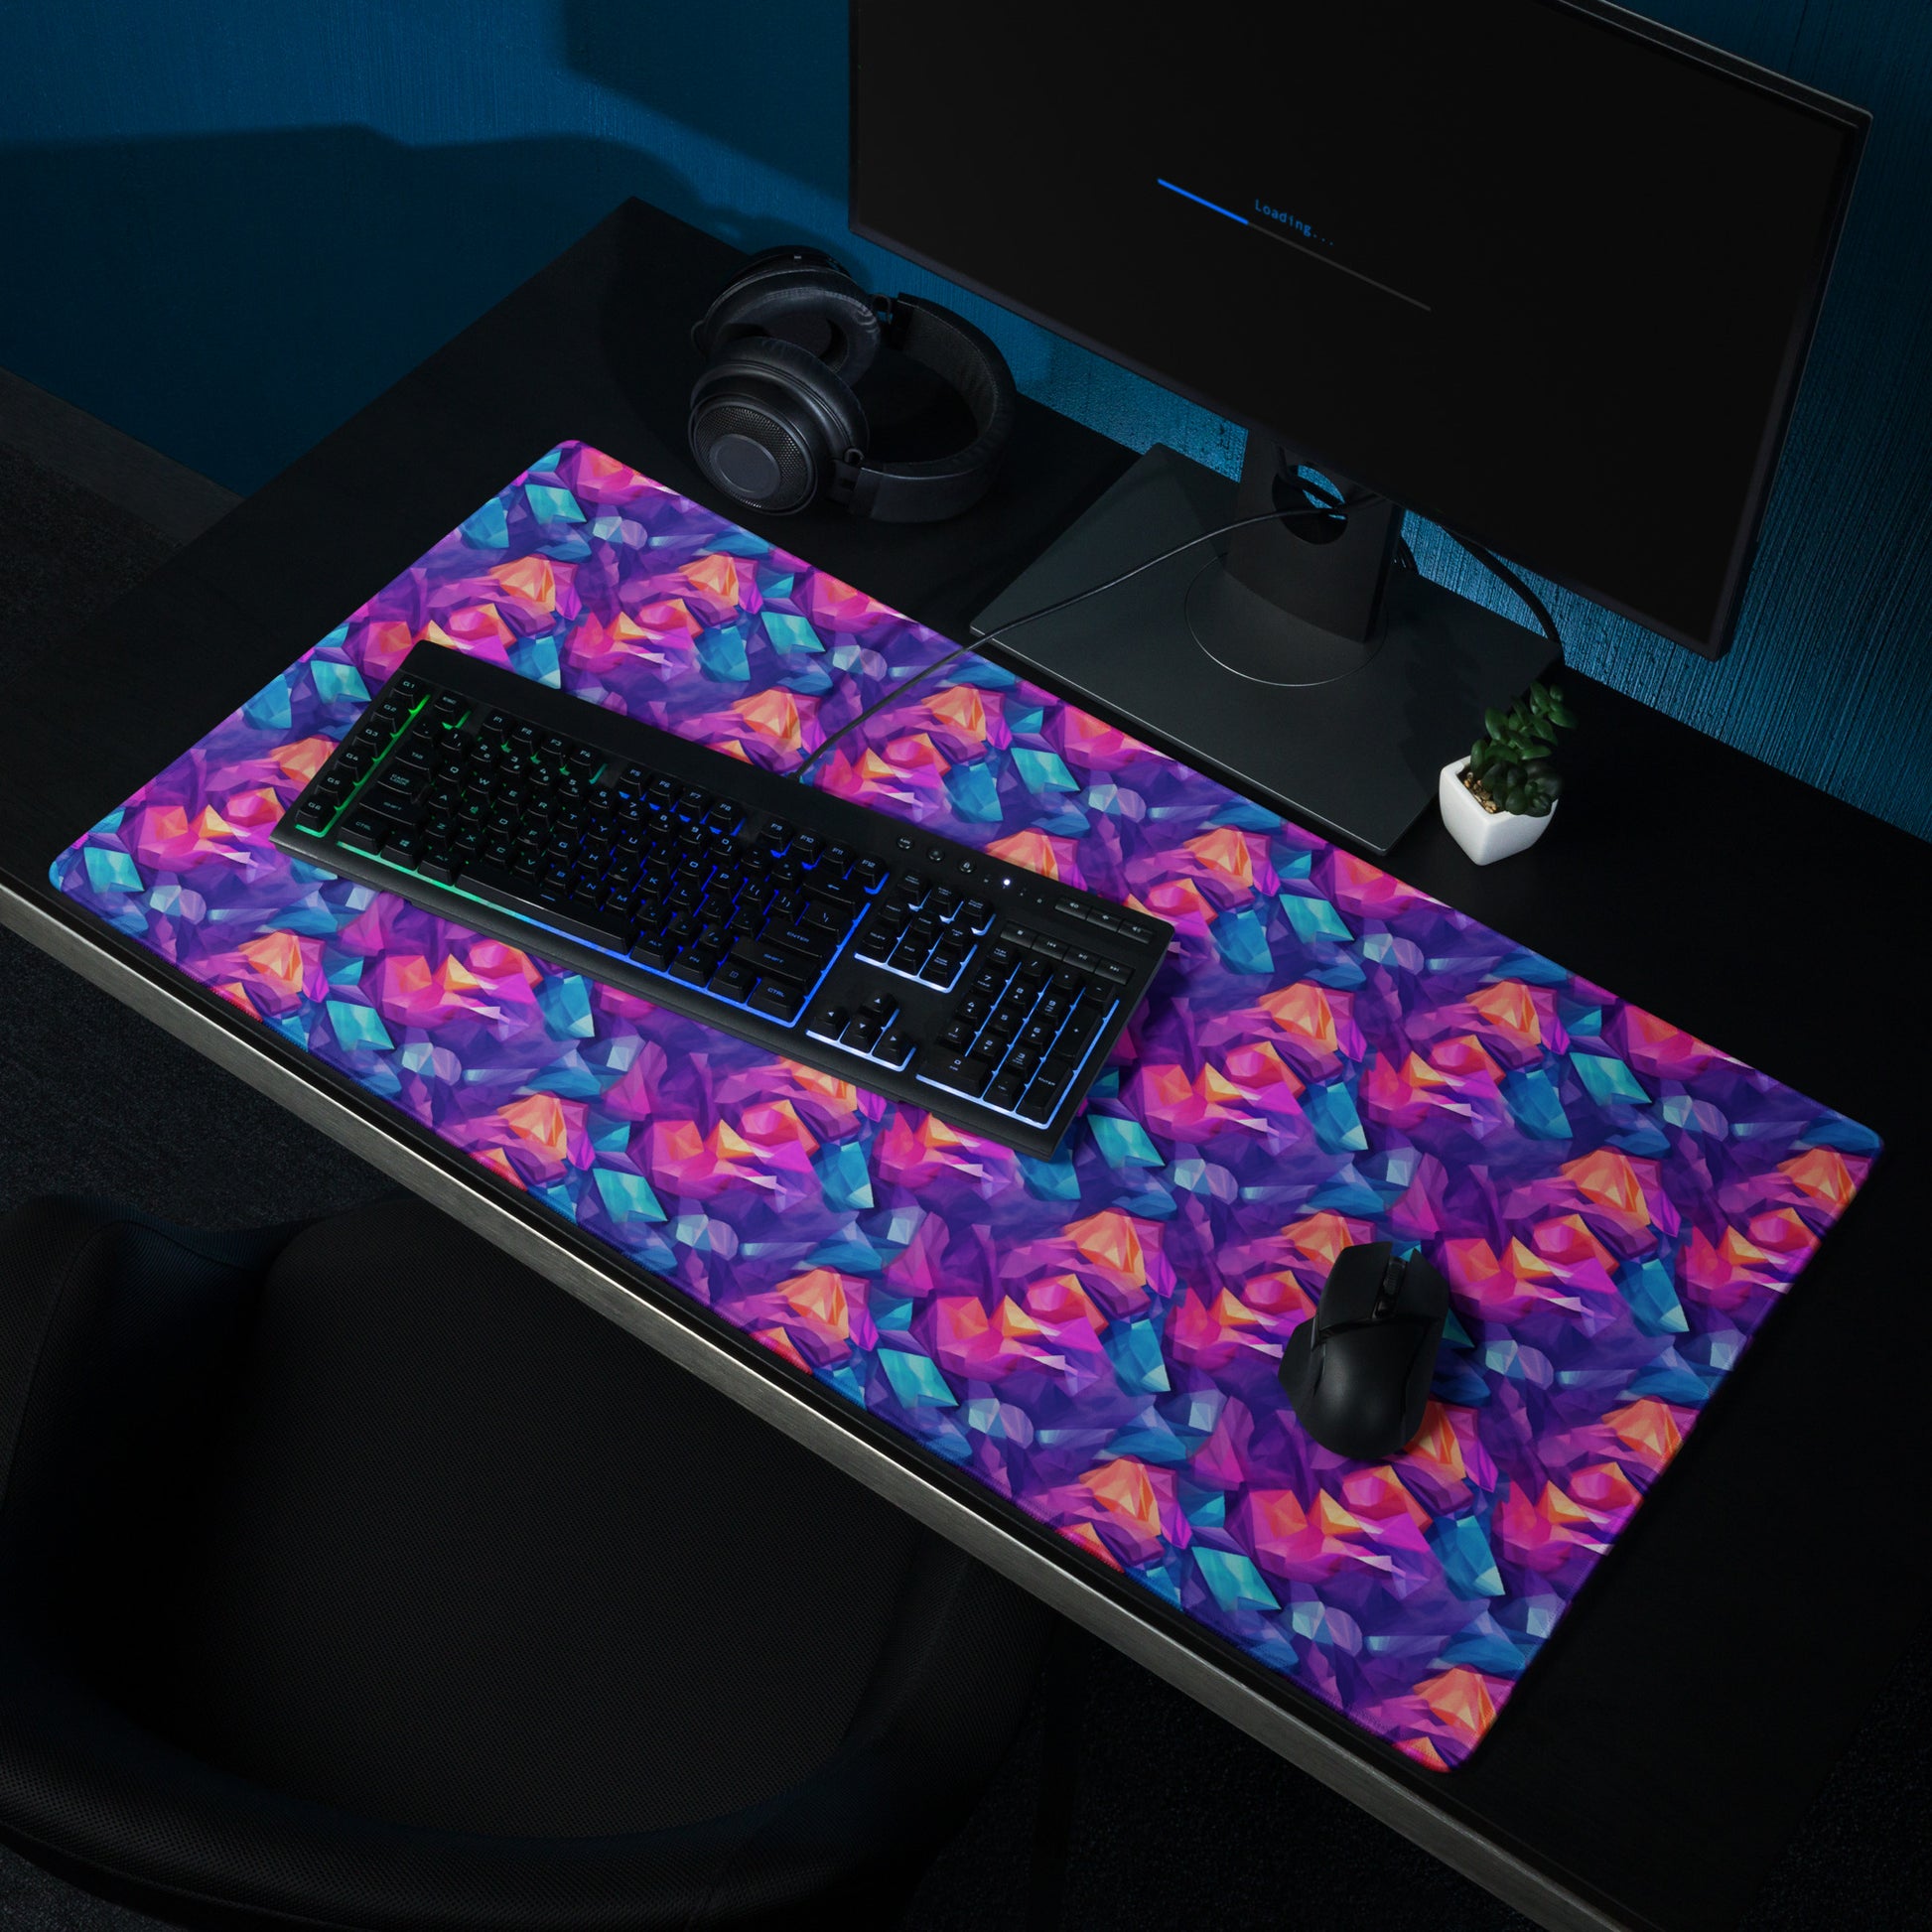 A 36" x 18" gaming desk pad with blue, purple, and orange crystals. A keyboard and mouse sit on it.